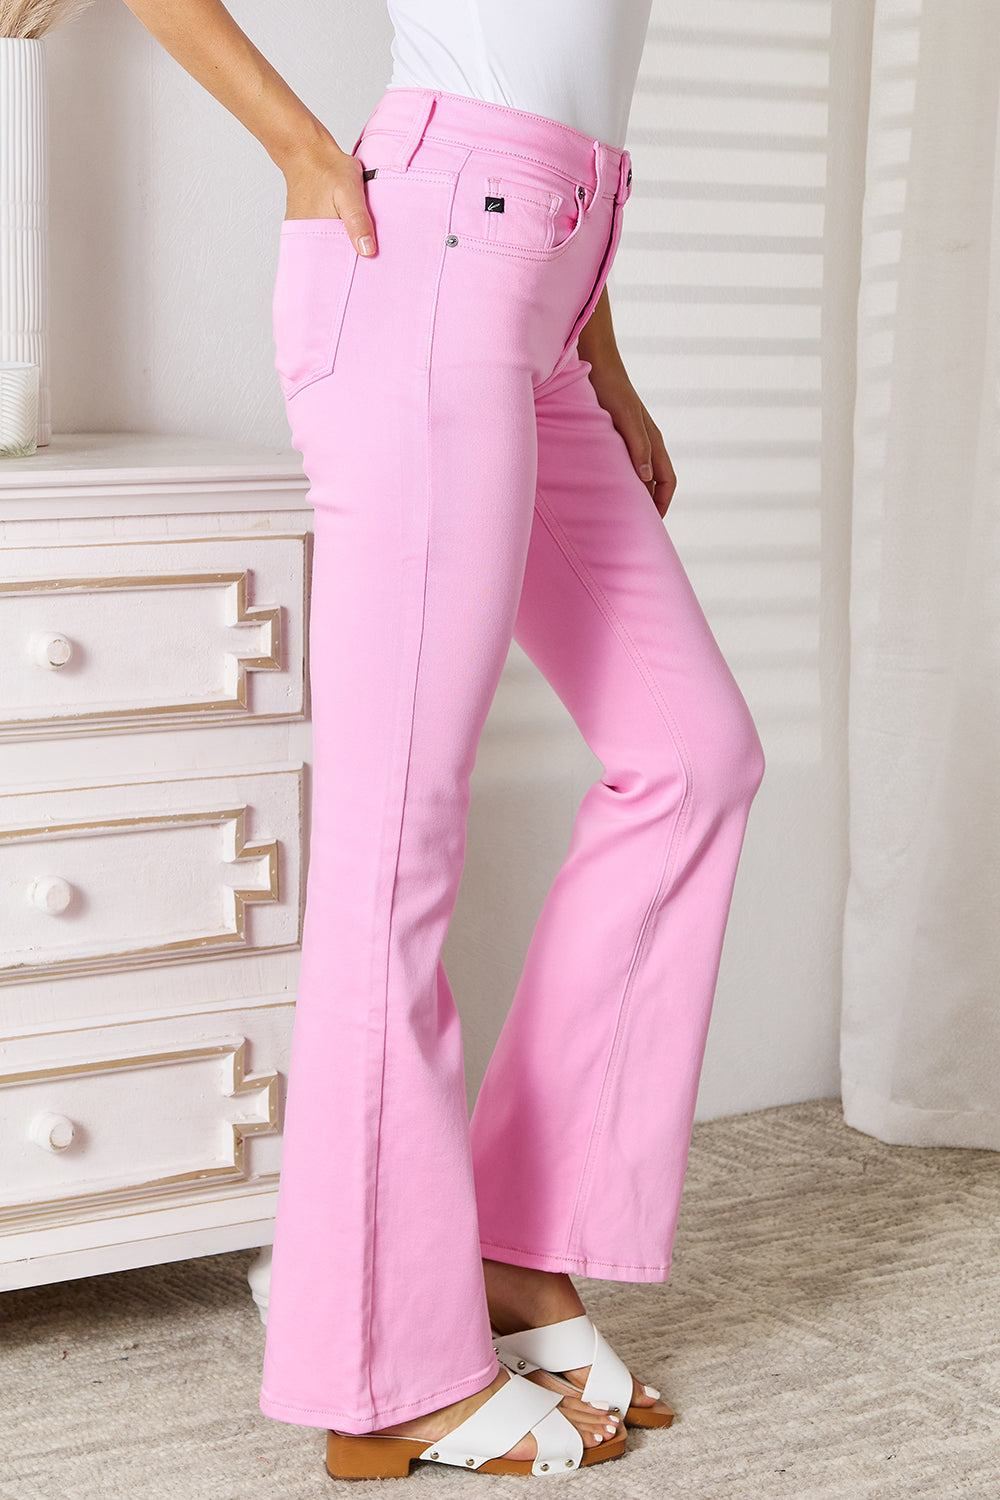 Kancan Jeans Bootcut - Pink - Inspired Eye Boutique